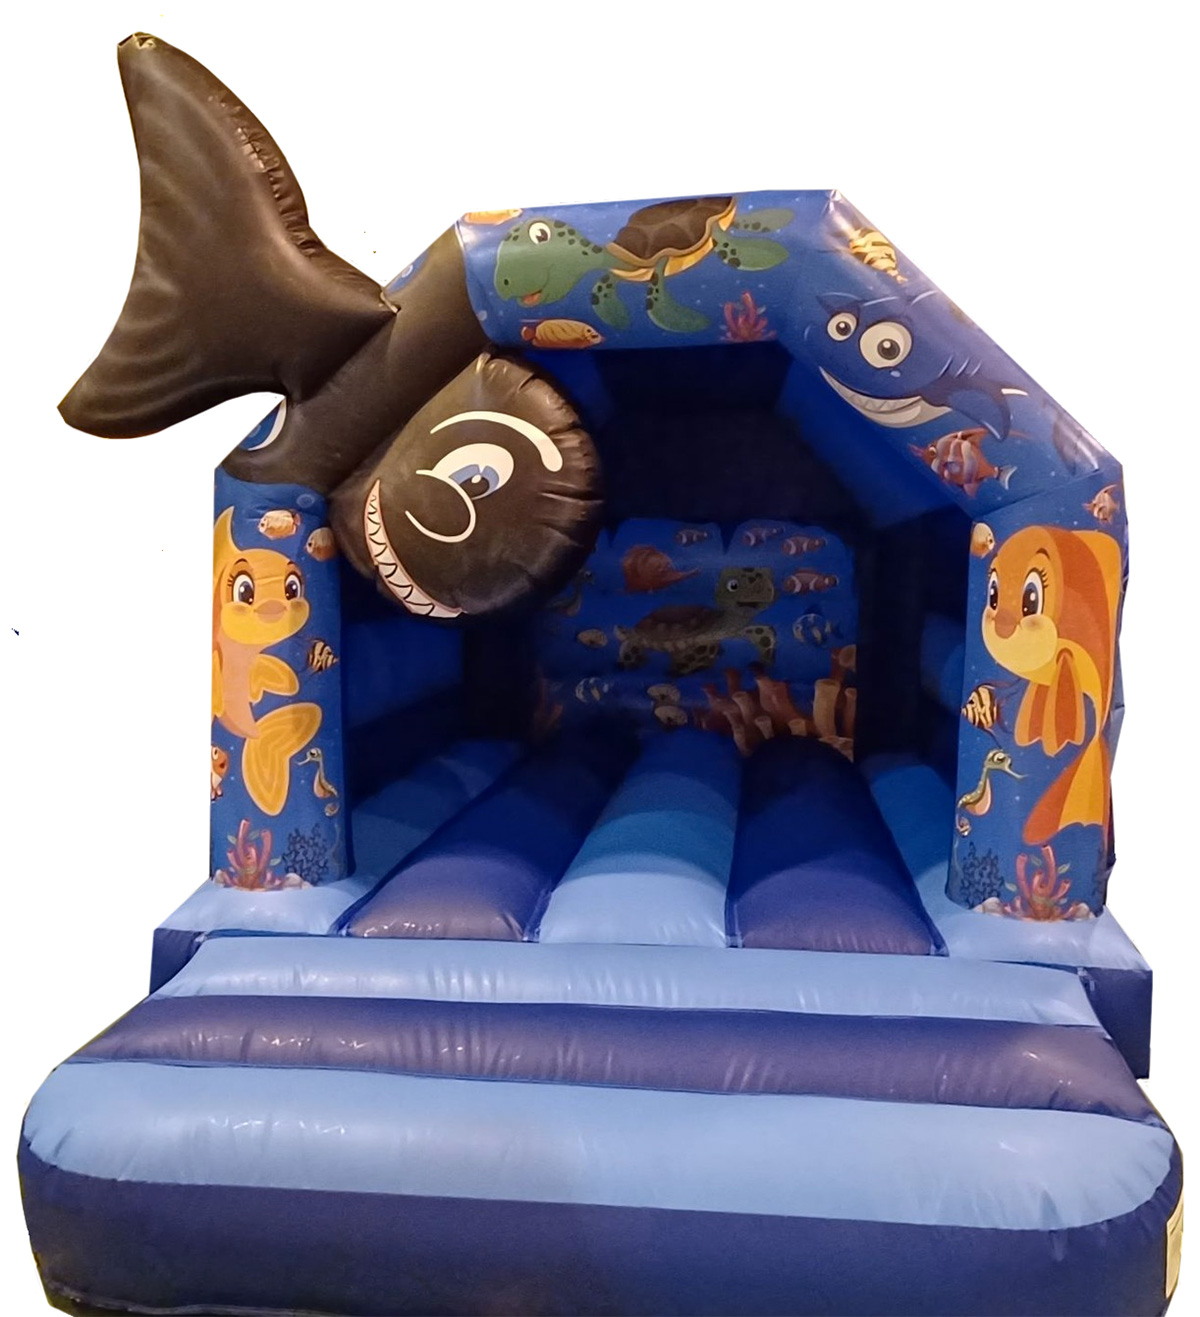 Bouncy Castle Sales - BC662 - Bouncy Inflatable for sale